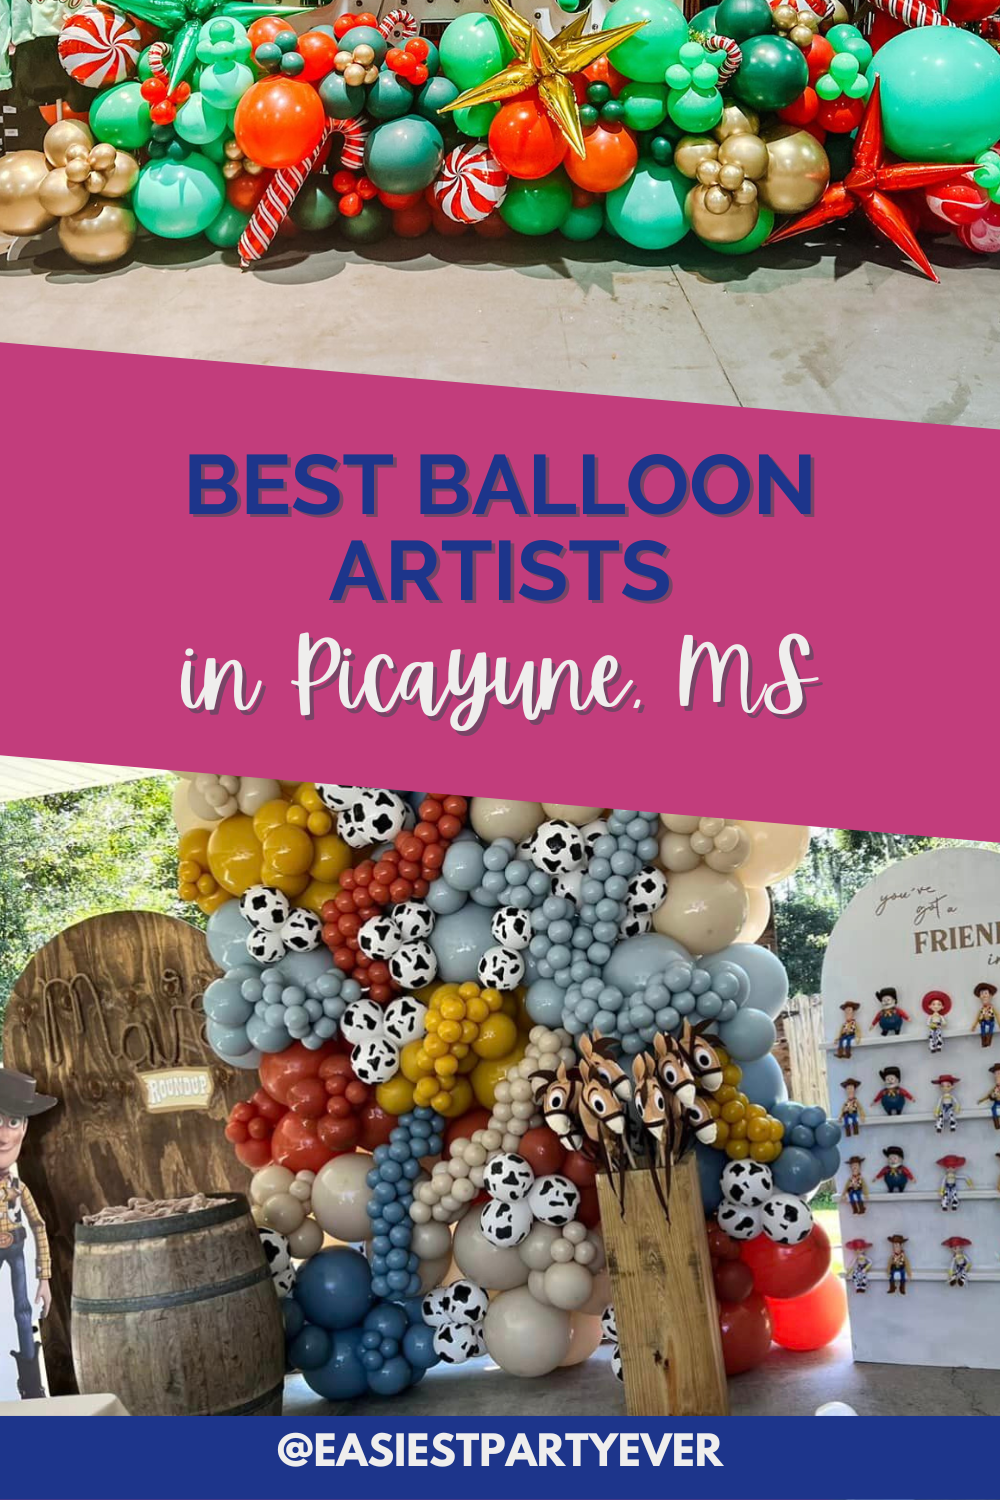 Best Balloon Artists to Hire in Picayune, MS